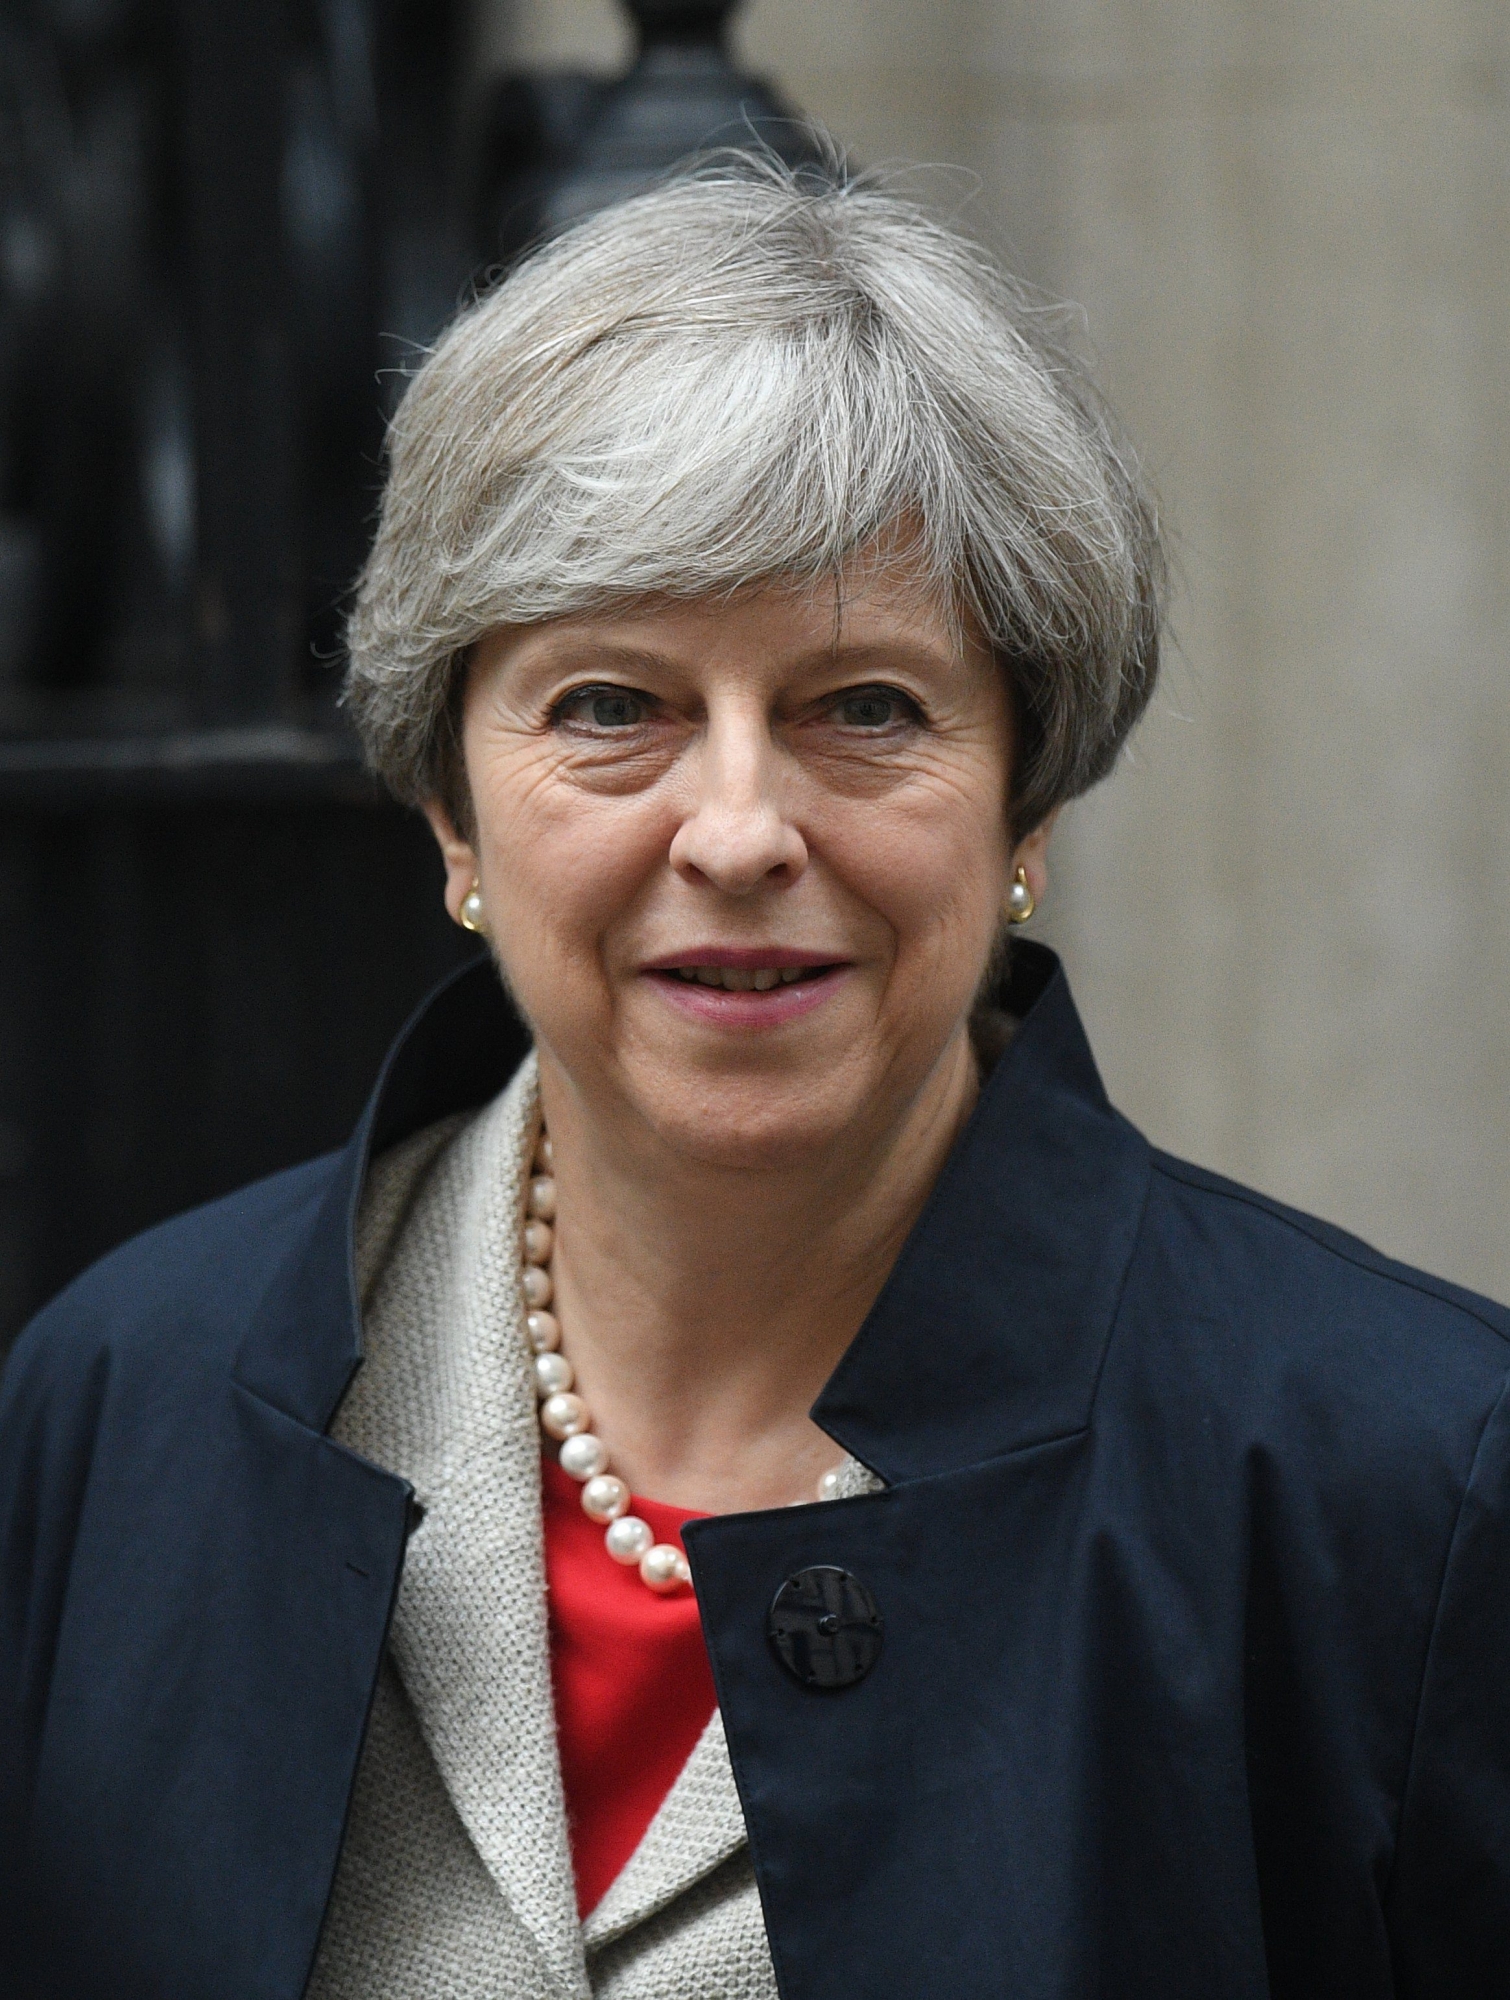 epa06056214 British Prime Minister Theresa May leaves 10 Downing street to attend a vote in the Houses of Parliament in London, Britain, 29 June 2017. The Prime Minister arrived from Germany as her minority Government faces a key Commons vote.  EPA/FACUNDO ARRIZABALAGA BRITAIN POLITICS